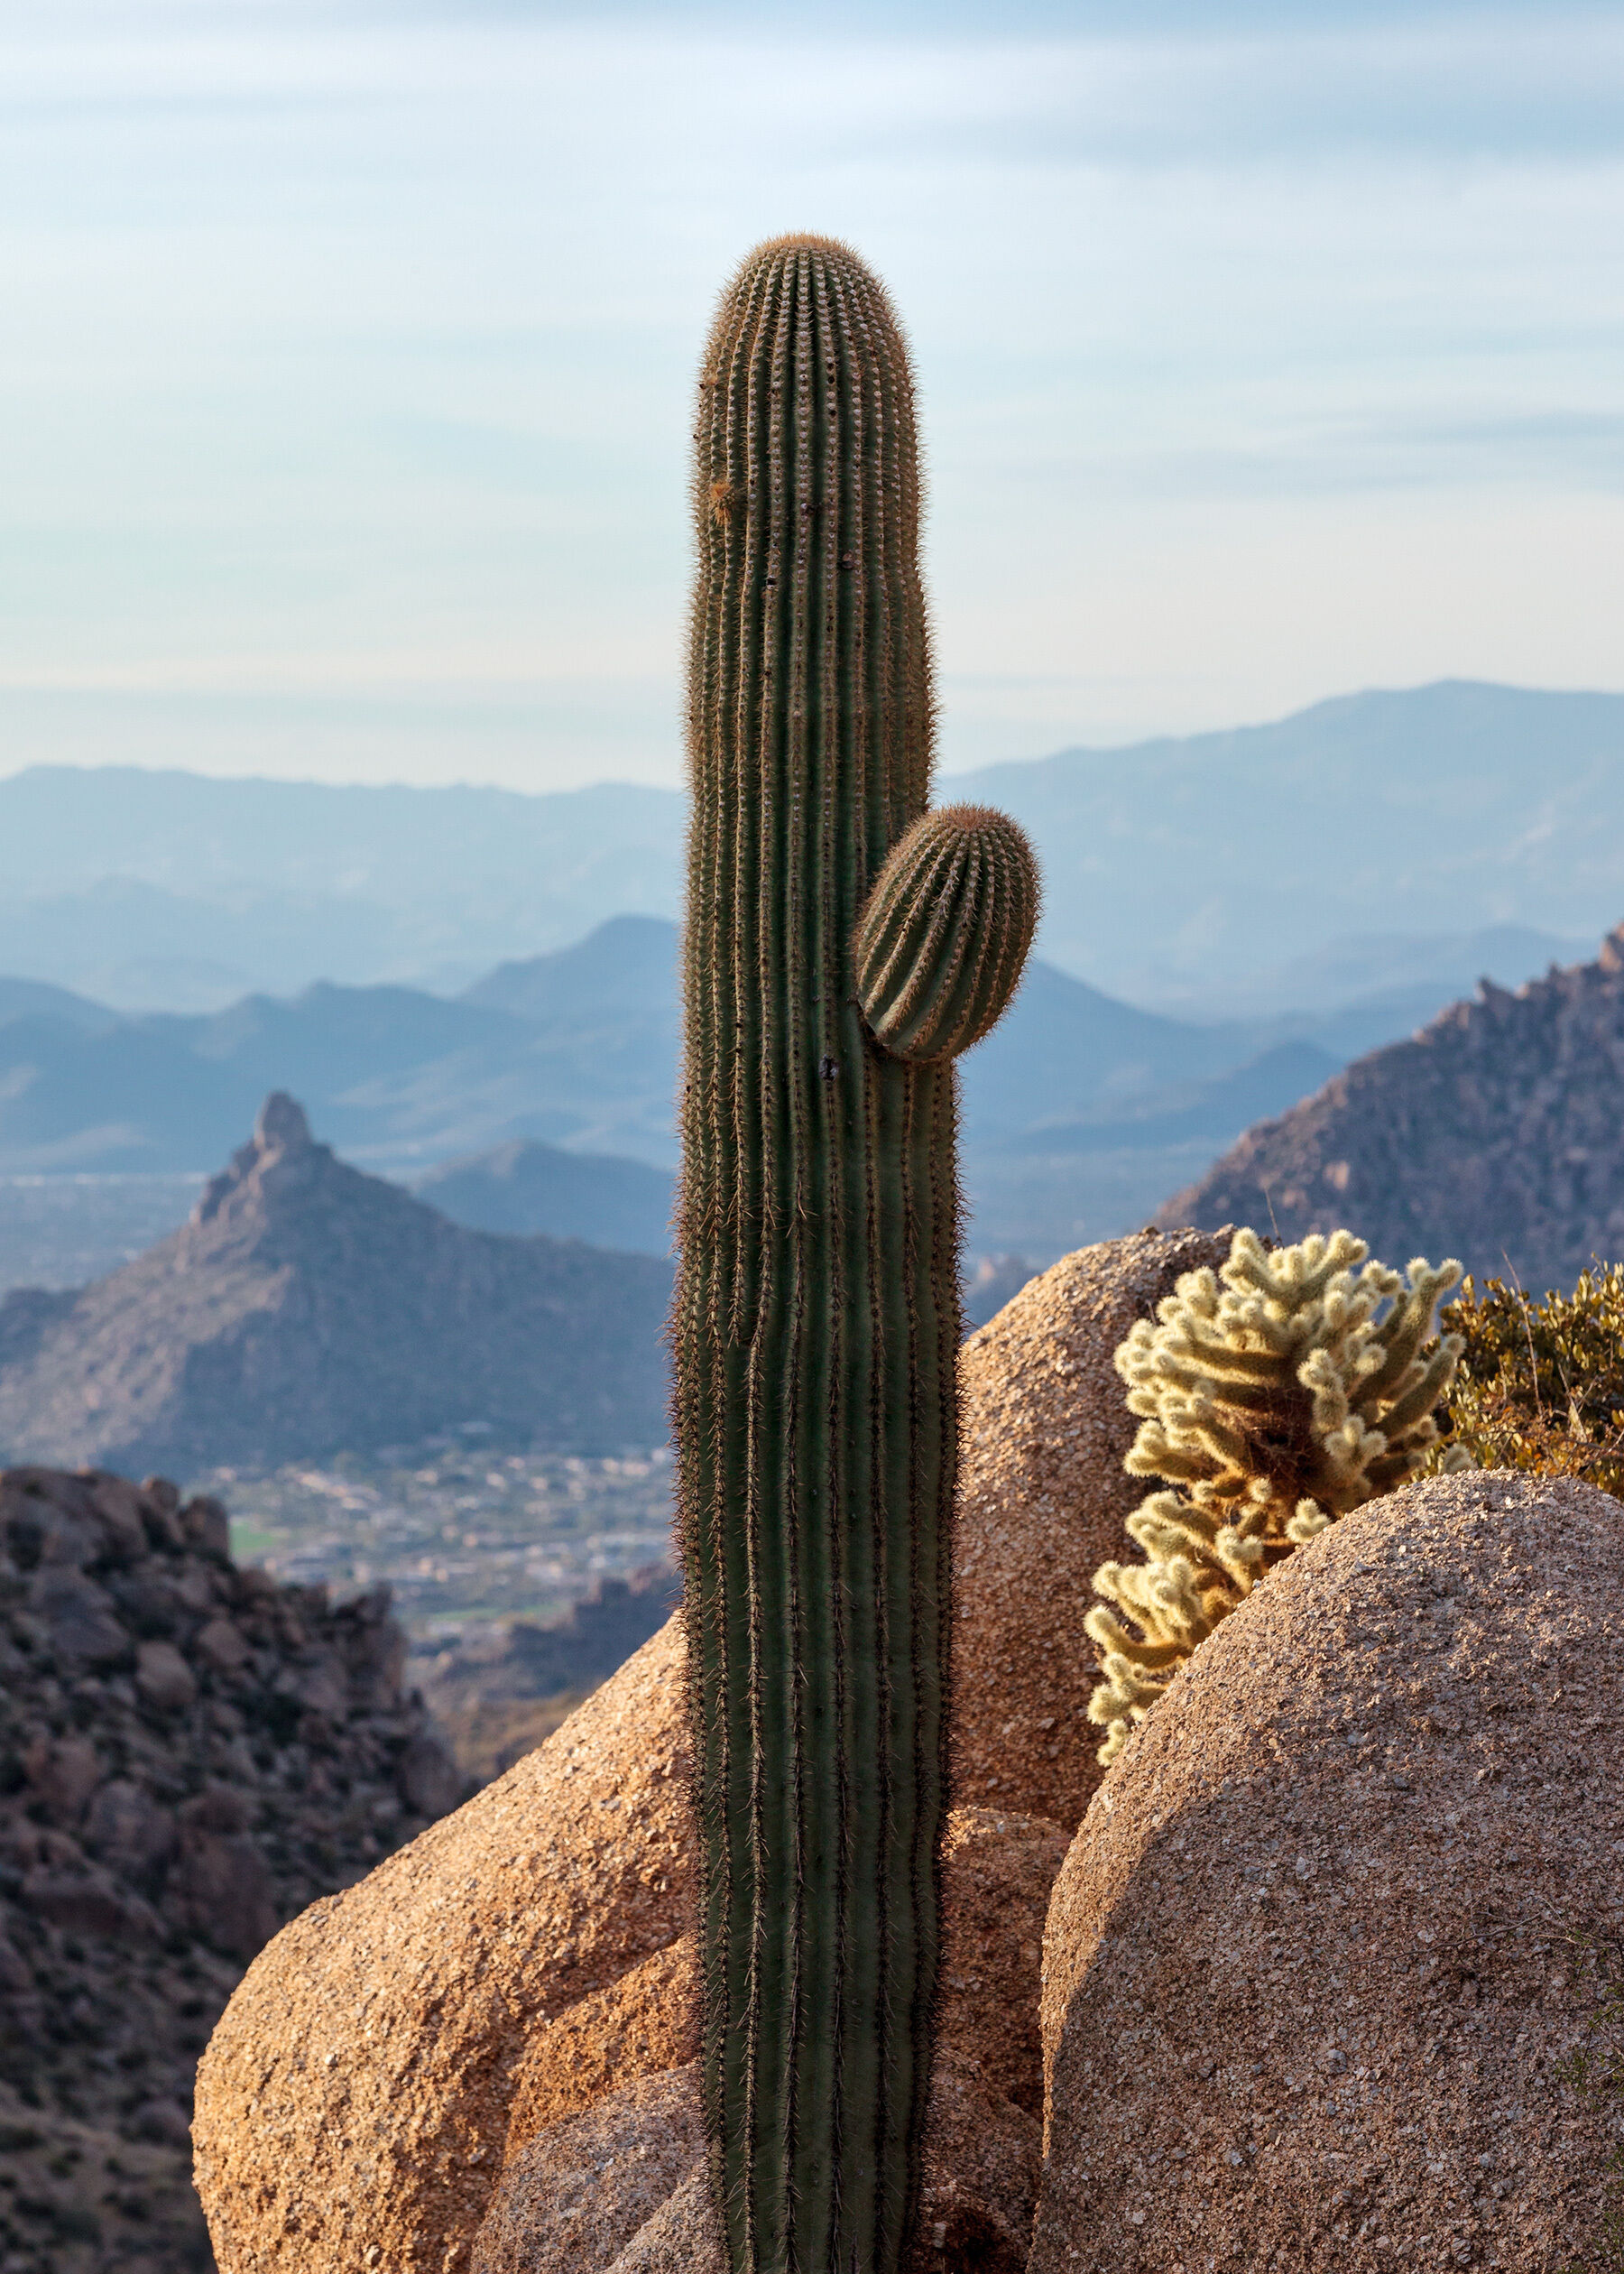 Saguaro cactus at Tom's Thumb, Arizona with cool evening light on layers of mountains in the backgorund